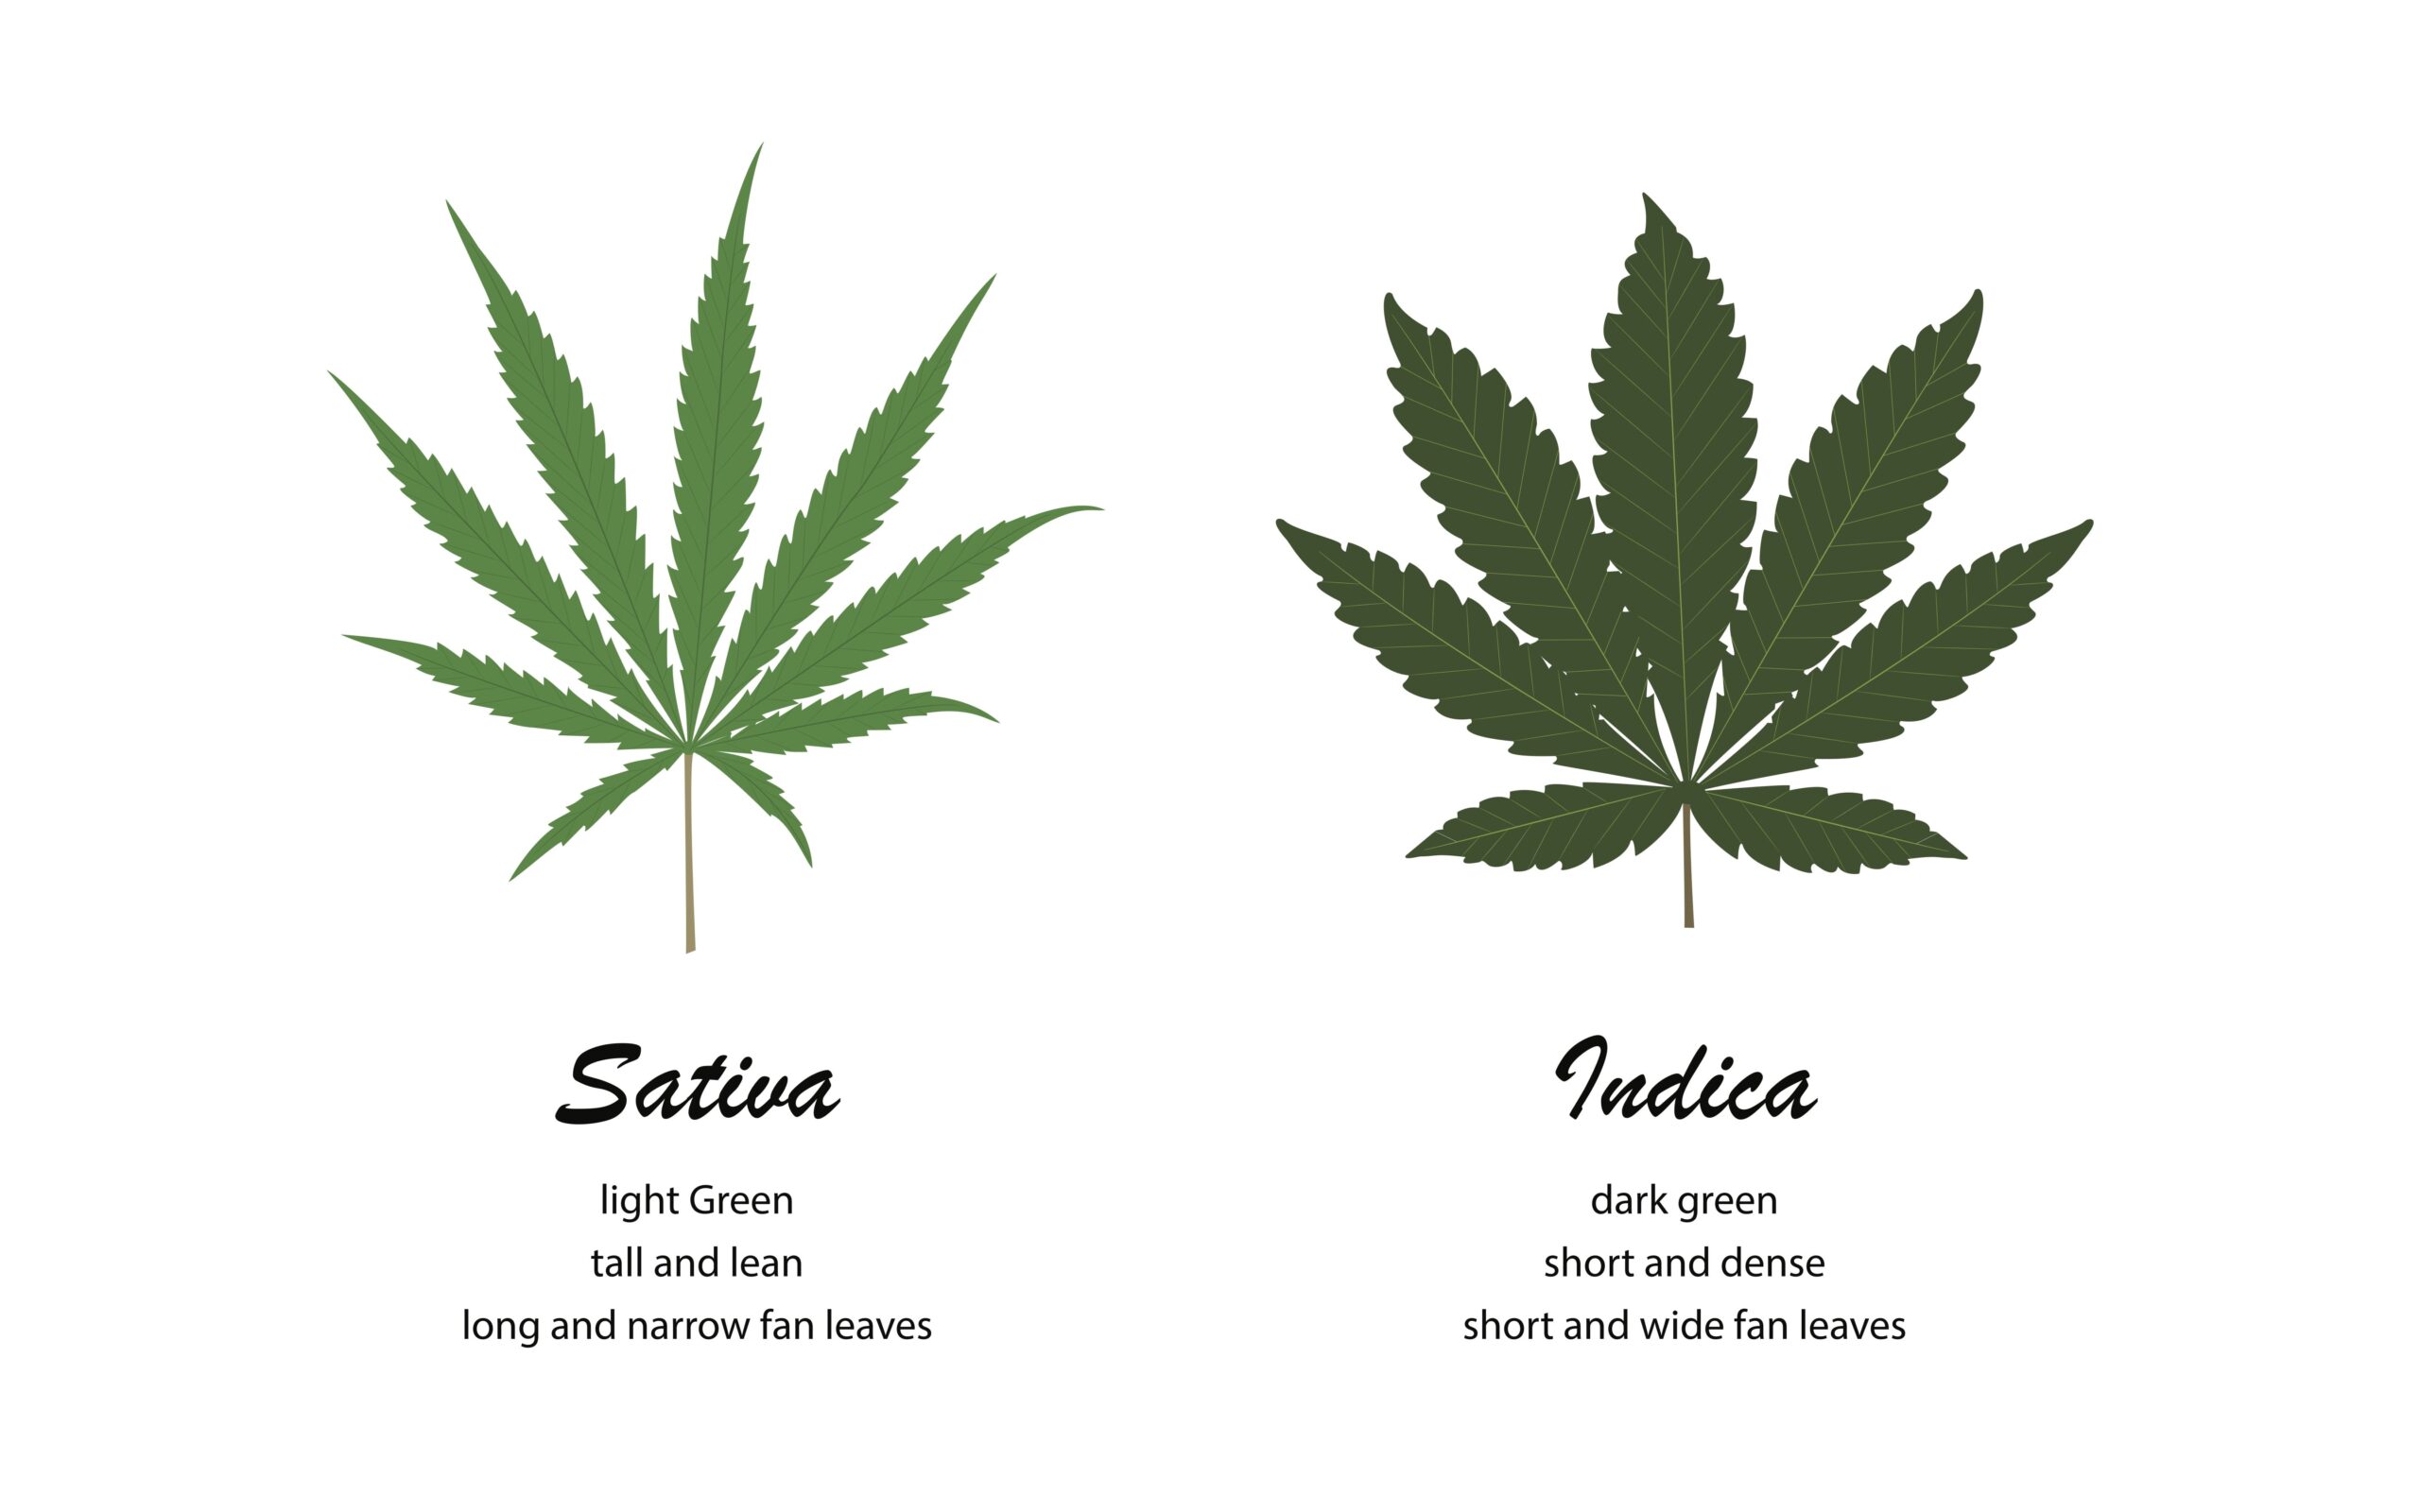 Sativa light green tall and lean leaf next to indica dark green and short leaf for a visual comparison of indica vs sativa